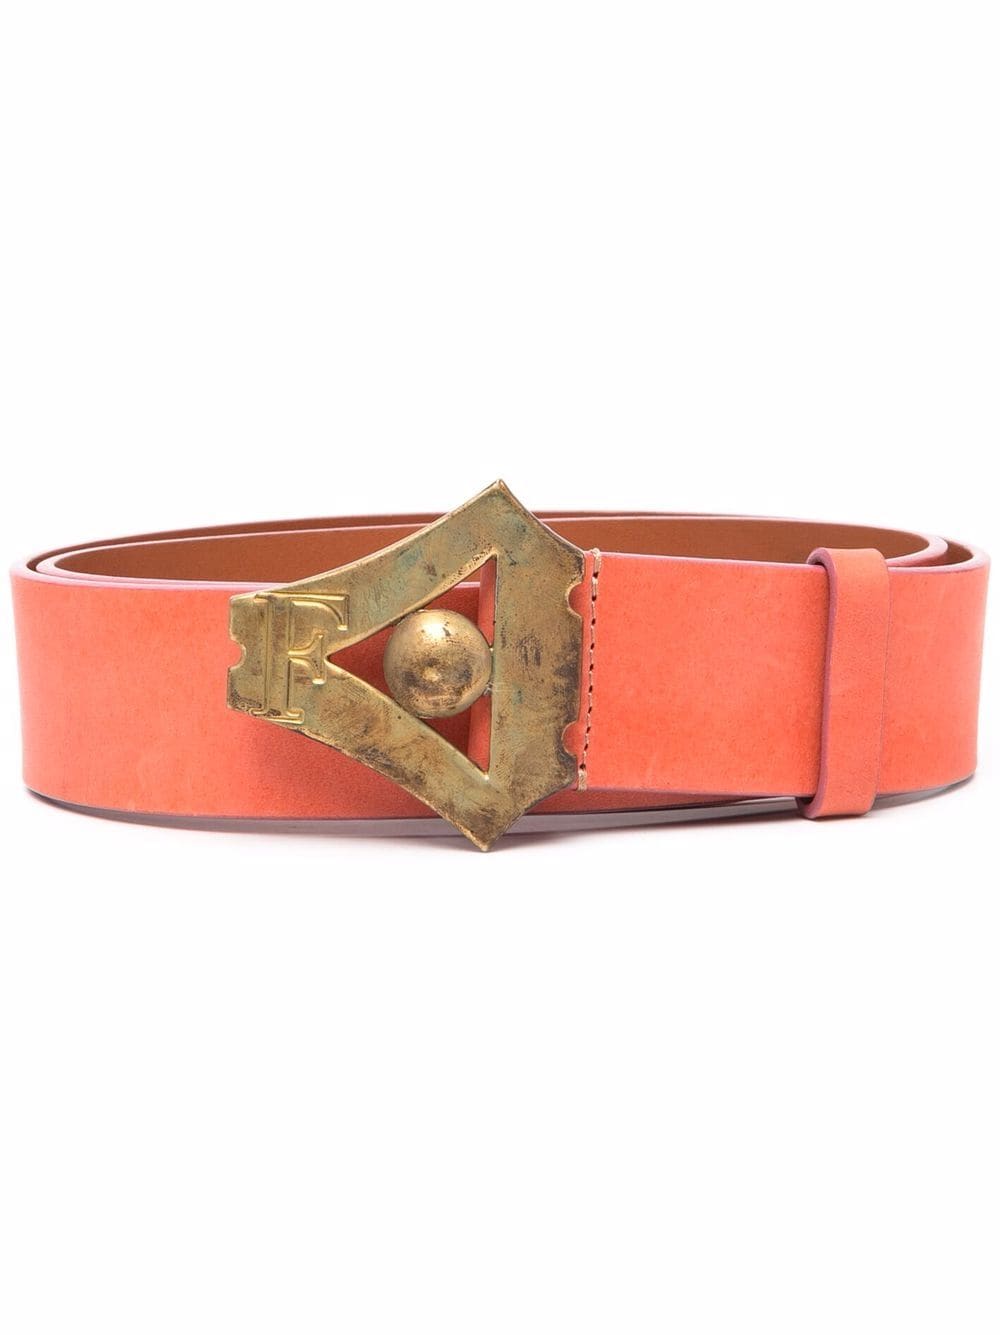 Gianfranco Ferré Pre-Owned 2000s leather buckle belt - Pink von Gianfranco Ferré Pre-Owned